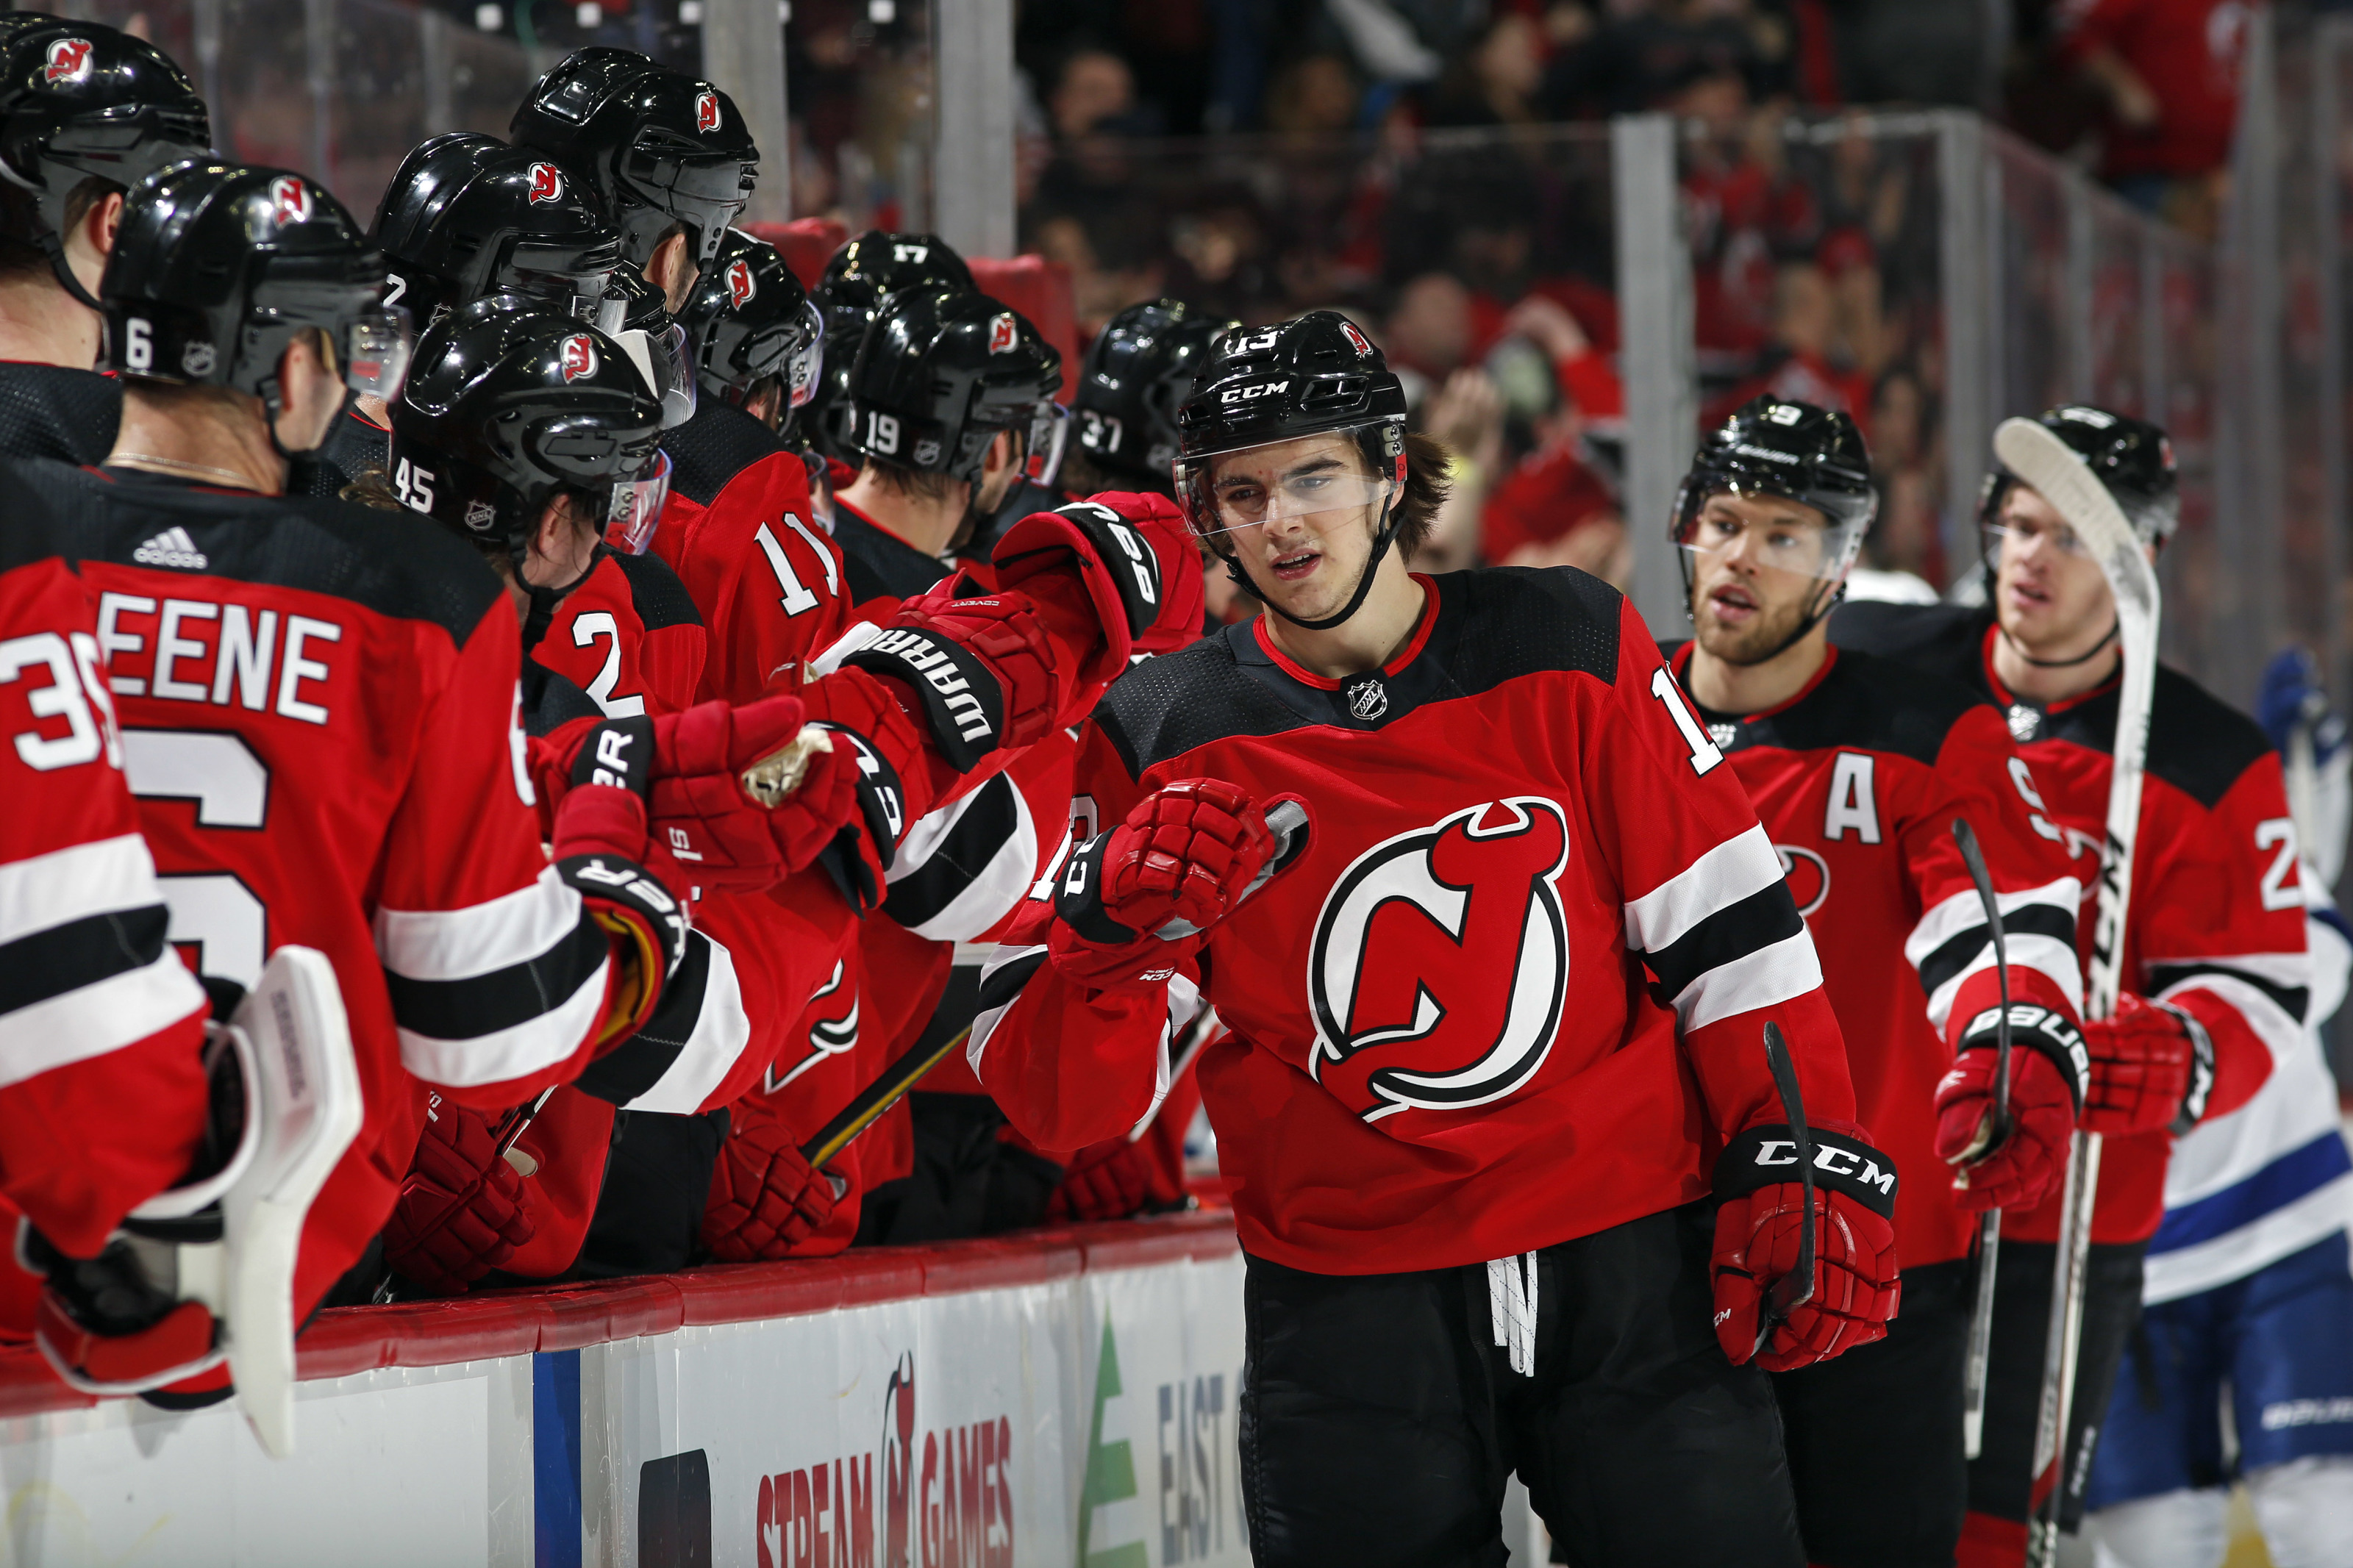 An Overview of the New Jersey Devils' Variable Pricing for the